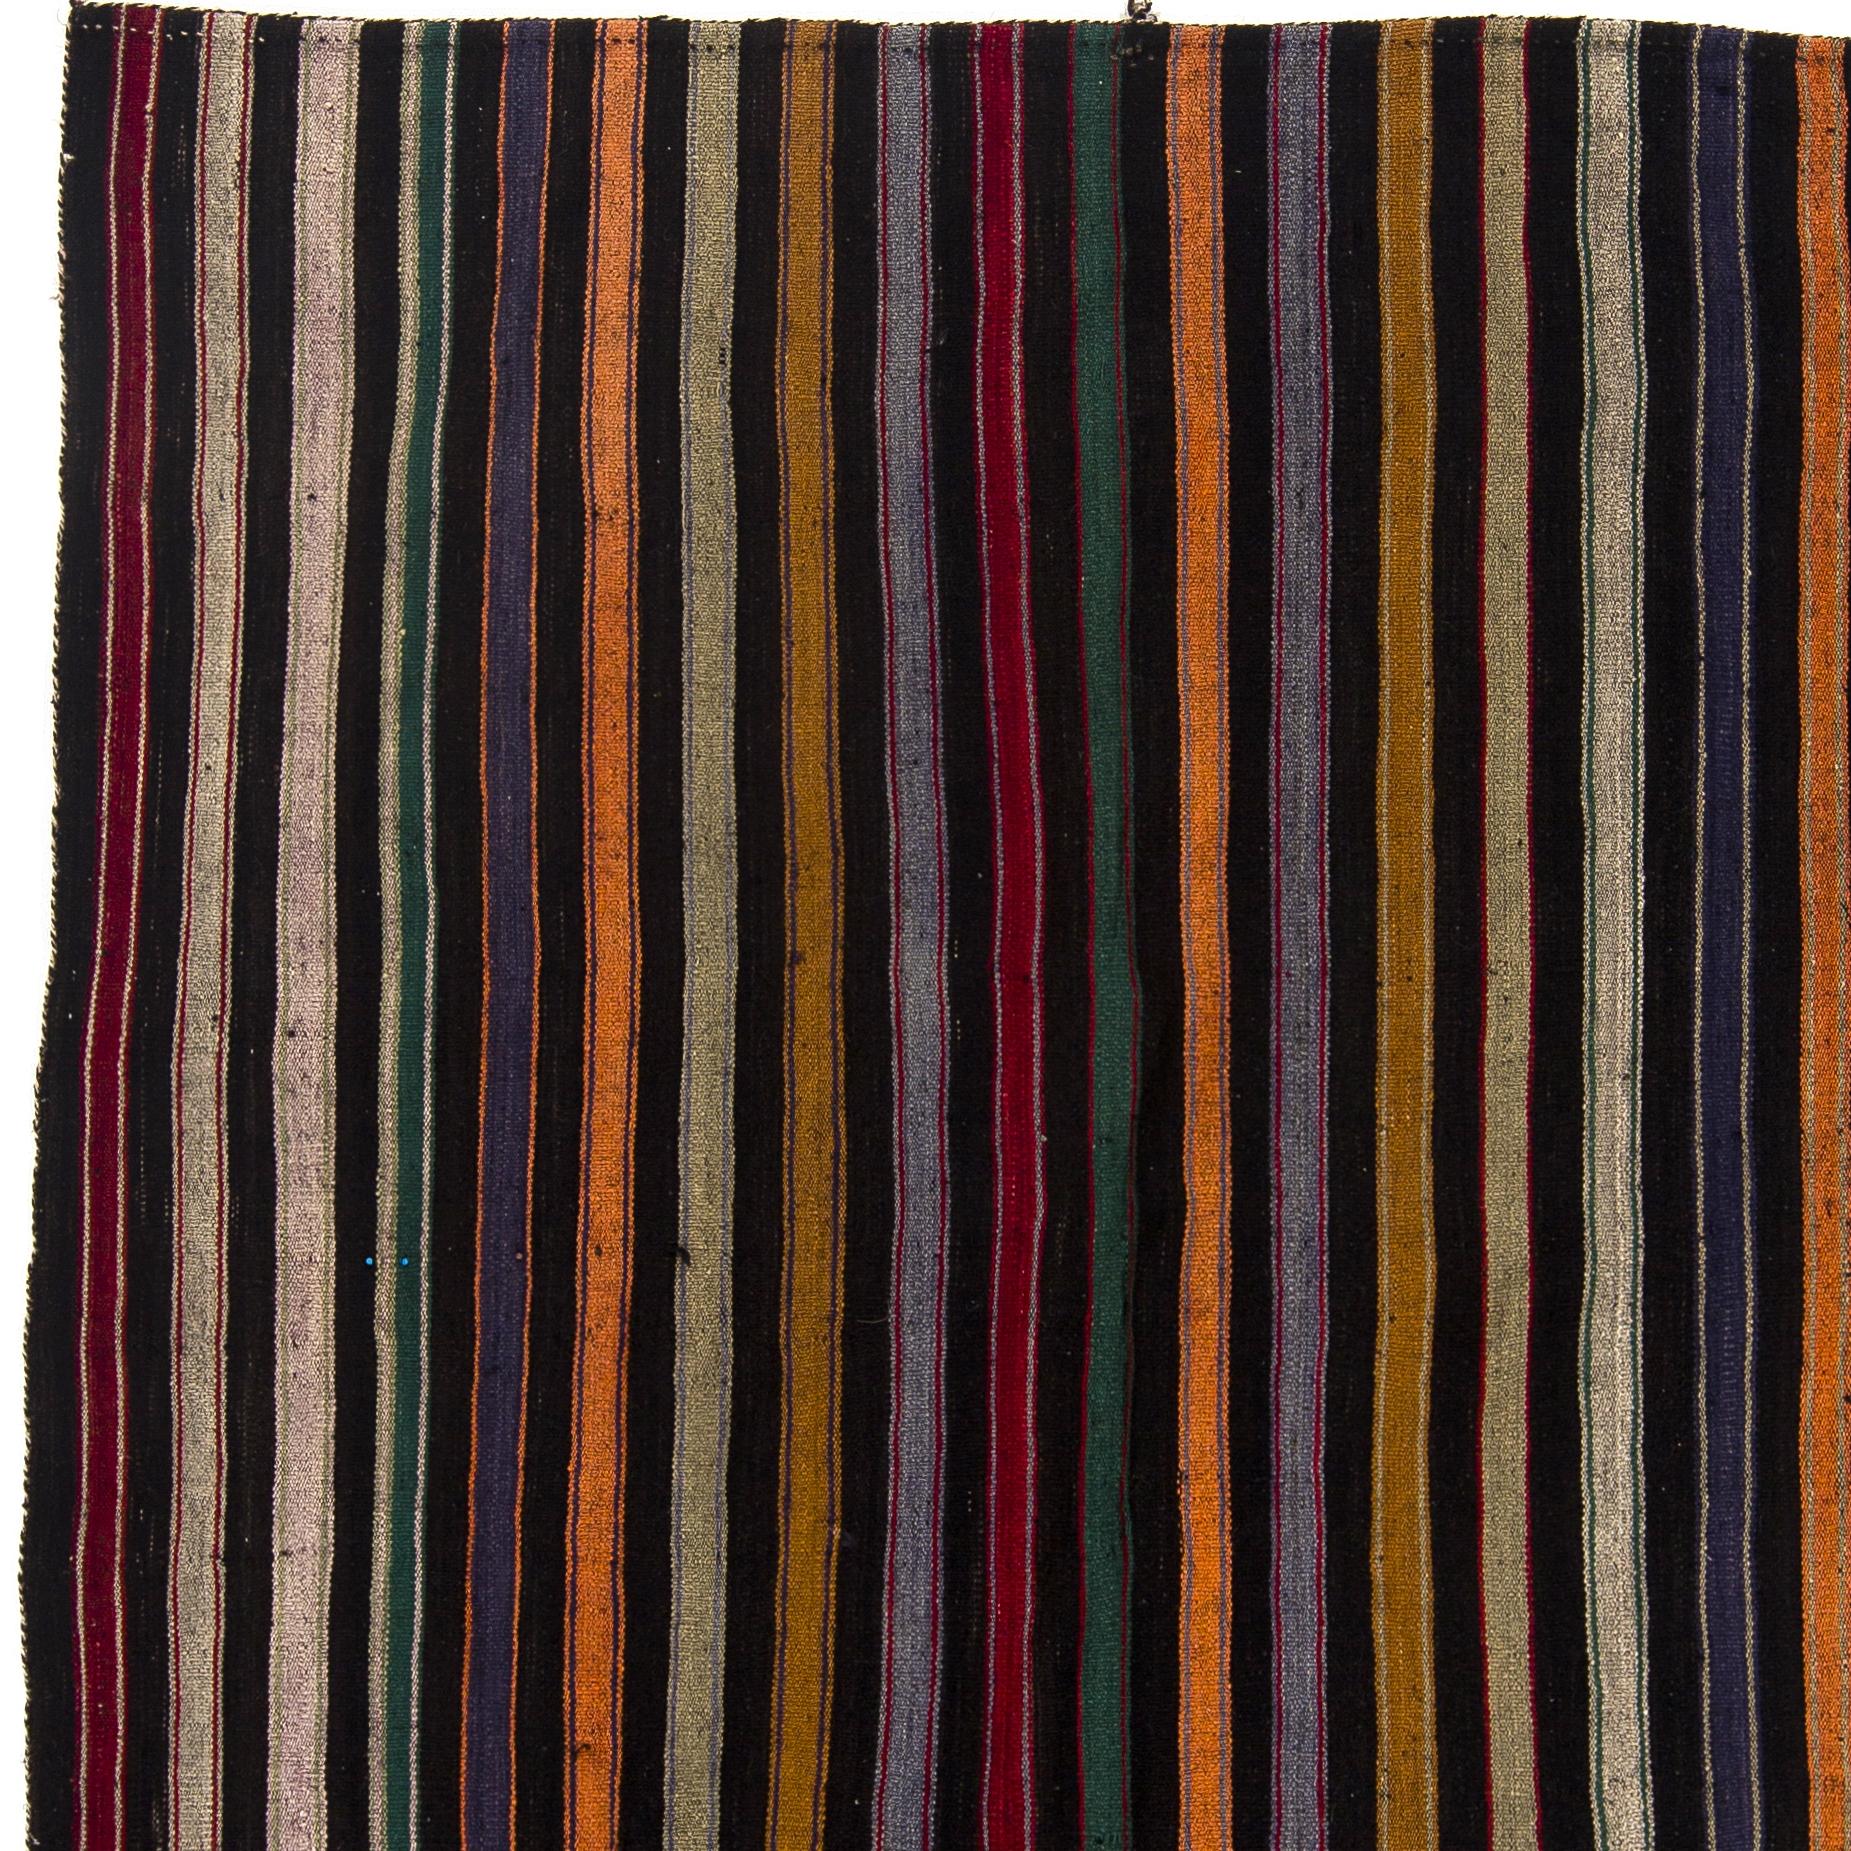 Turkish 5.6x7 Ft Hand-Woven Vintage Kilim Rug with Stripes. 100% Wool Floor Covering For Sale